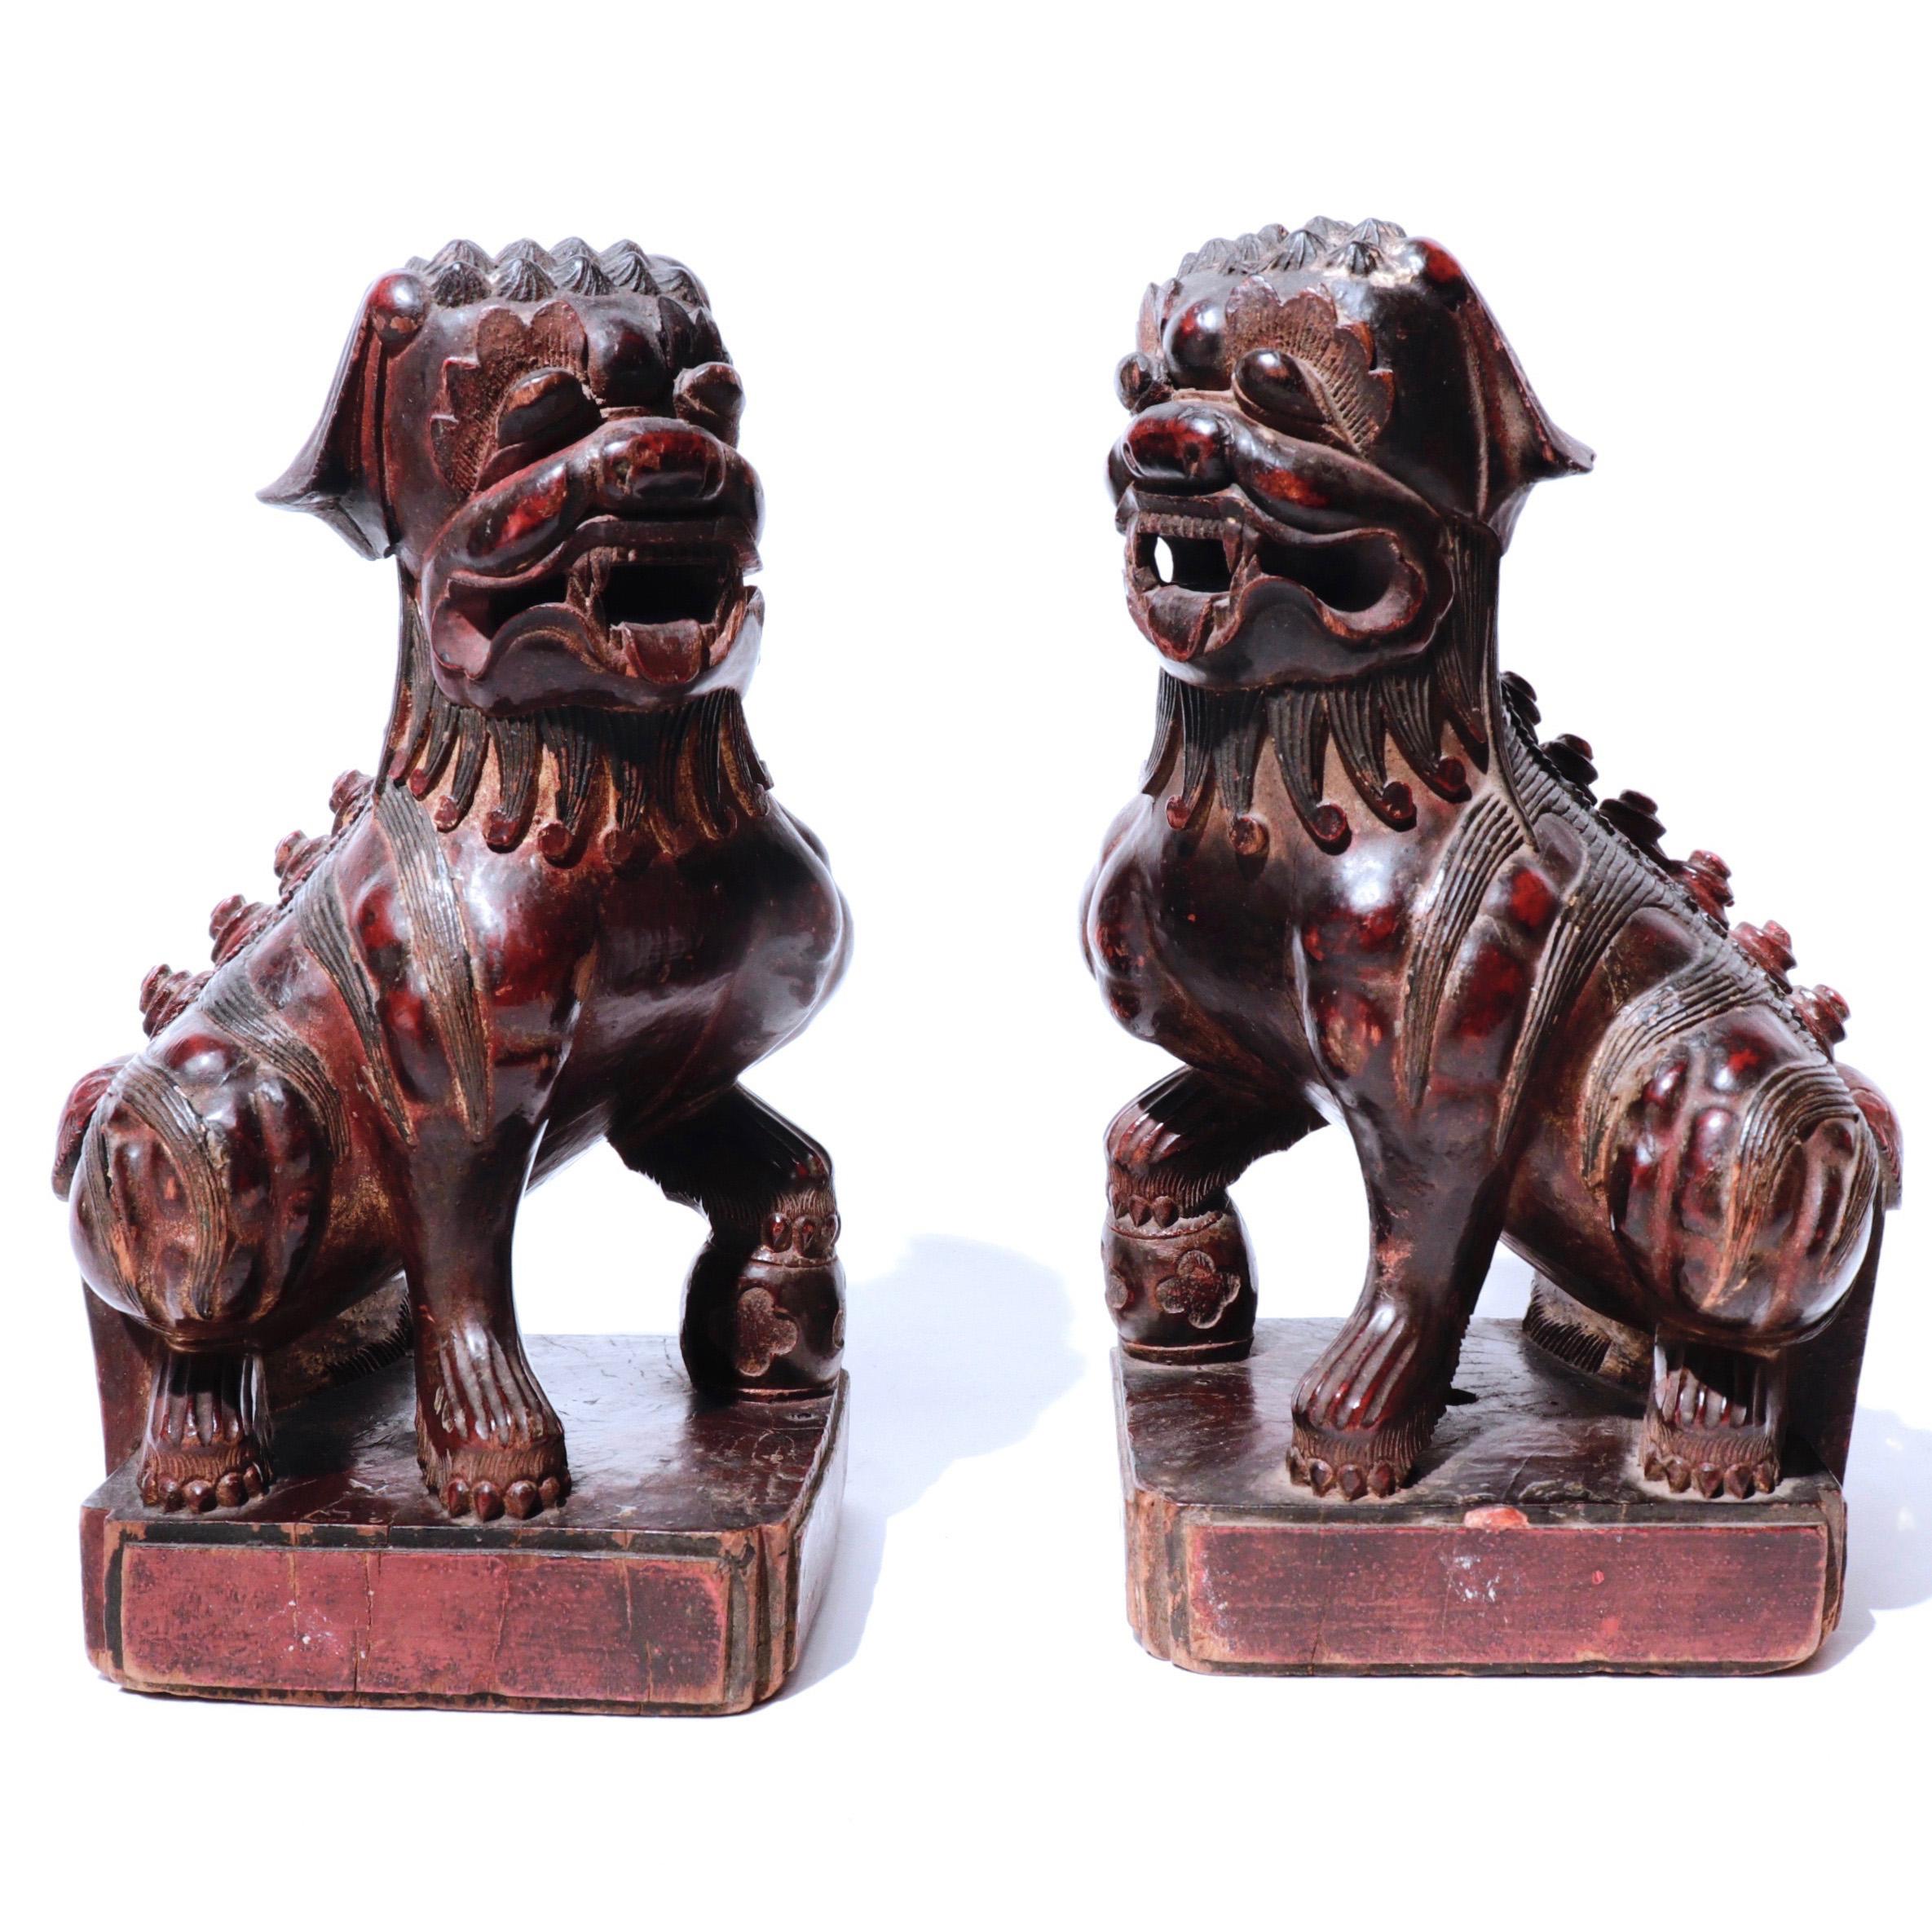 Chinese pair of wood carved Fu Dogs, rendered from a single block of hardwood each, with exquisite detailing in a naive style, the dogs are opposing, crouched on their haunches, each with one paw on a drum, detailed musculature and hair spirals